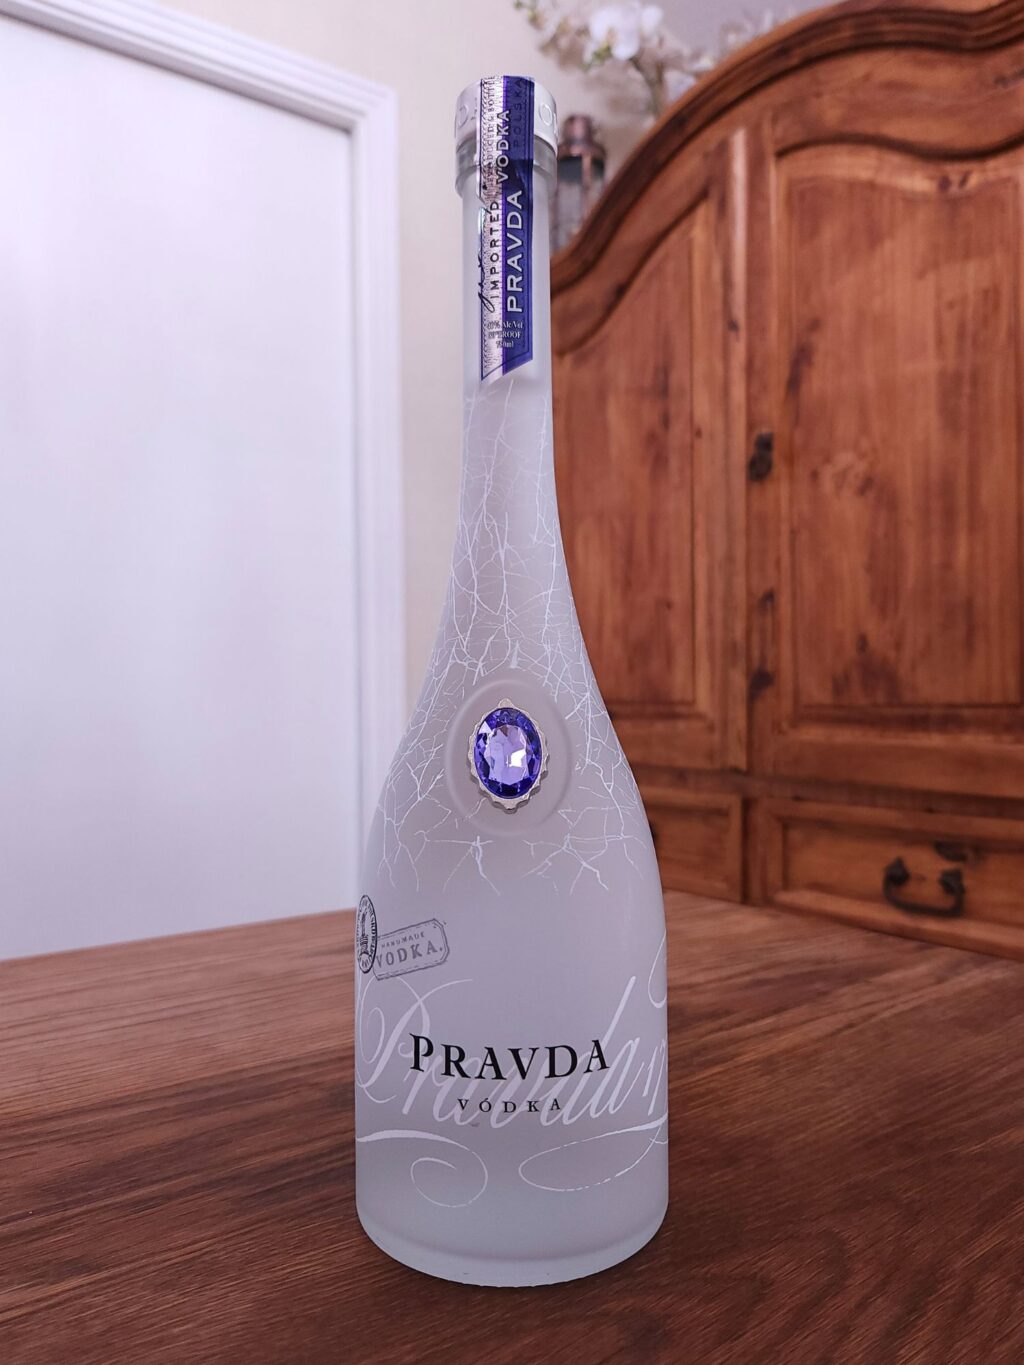 Bottle of Pravda Vodka sitting on a wooden table, in front of a mixed white and wooden background